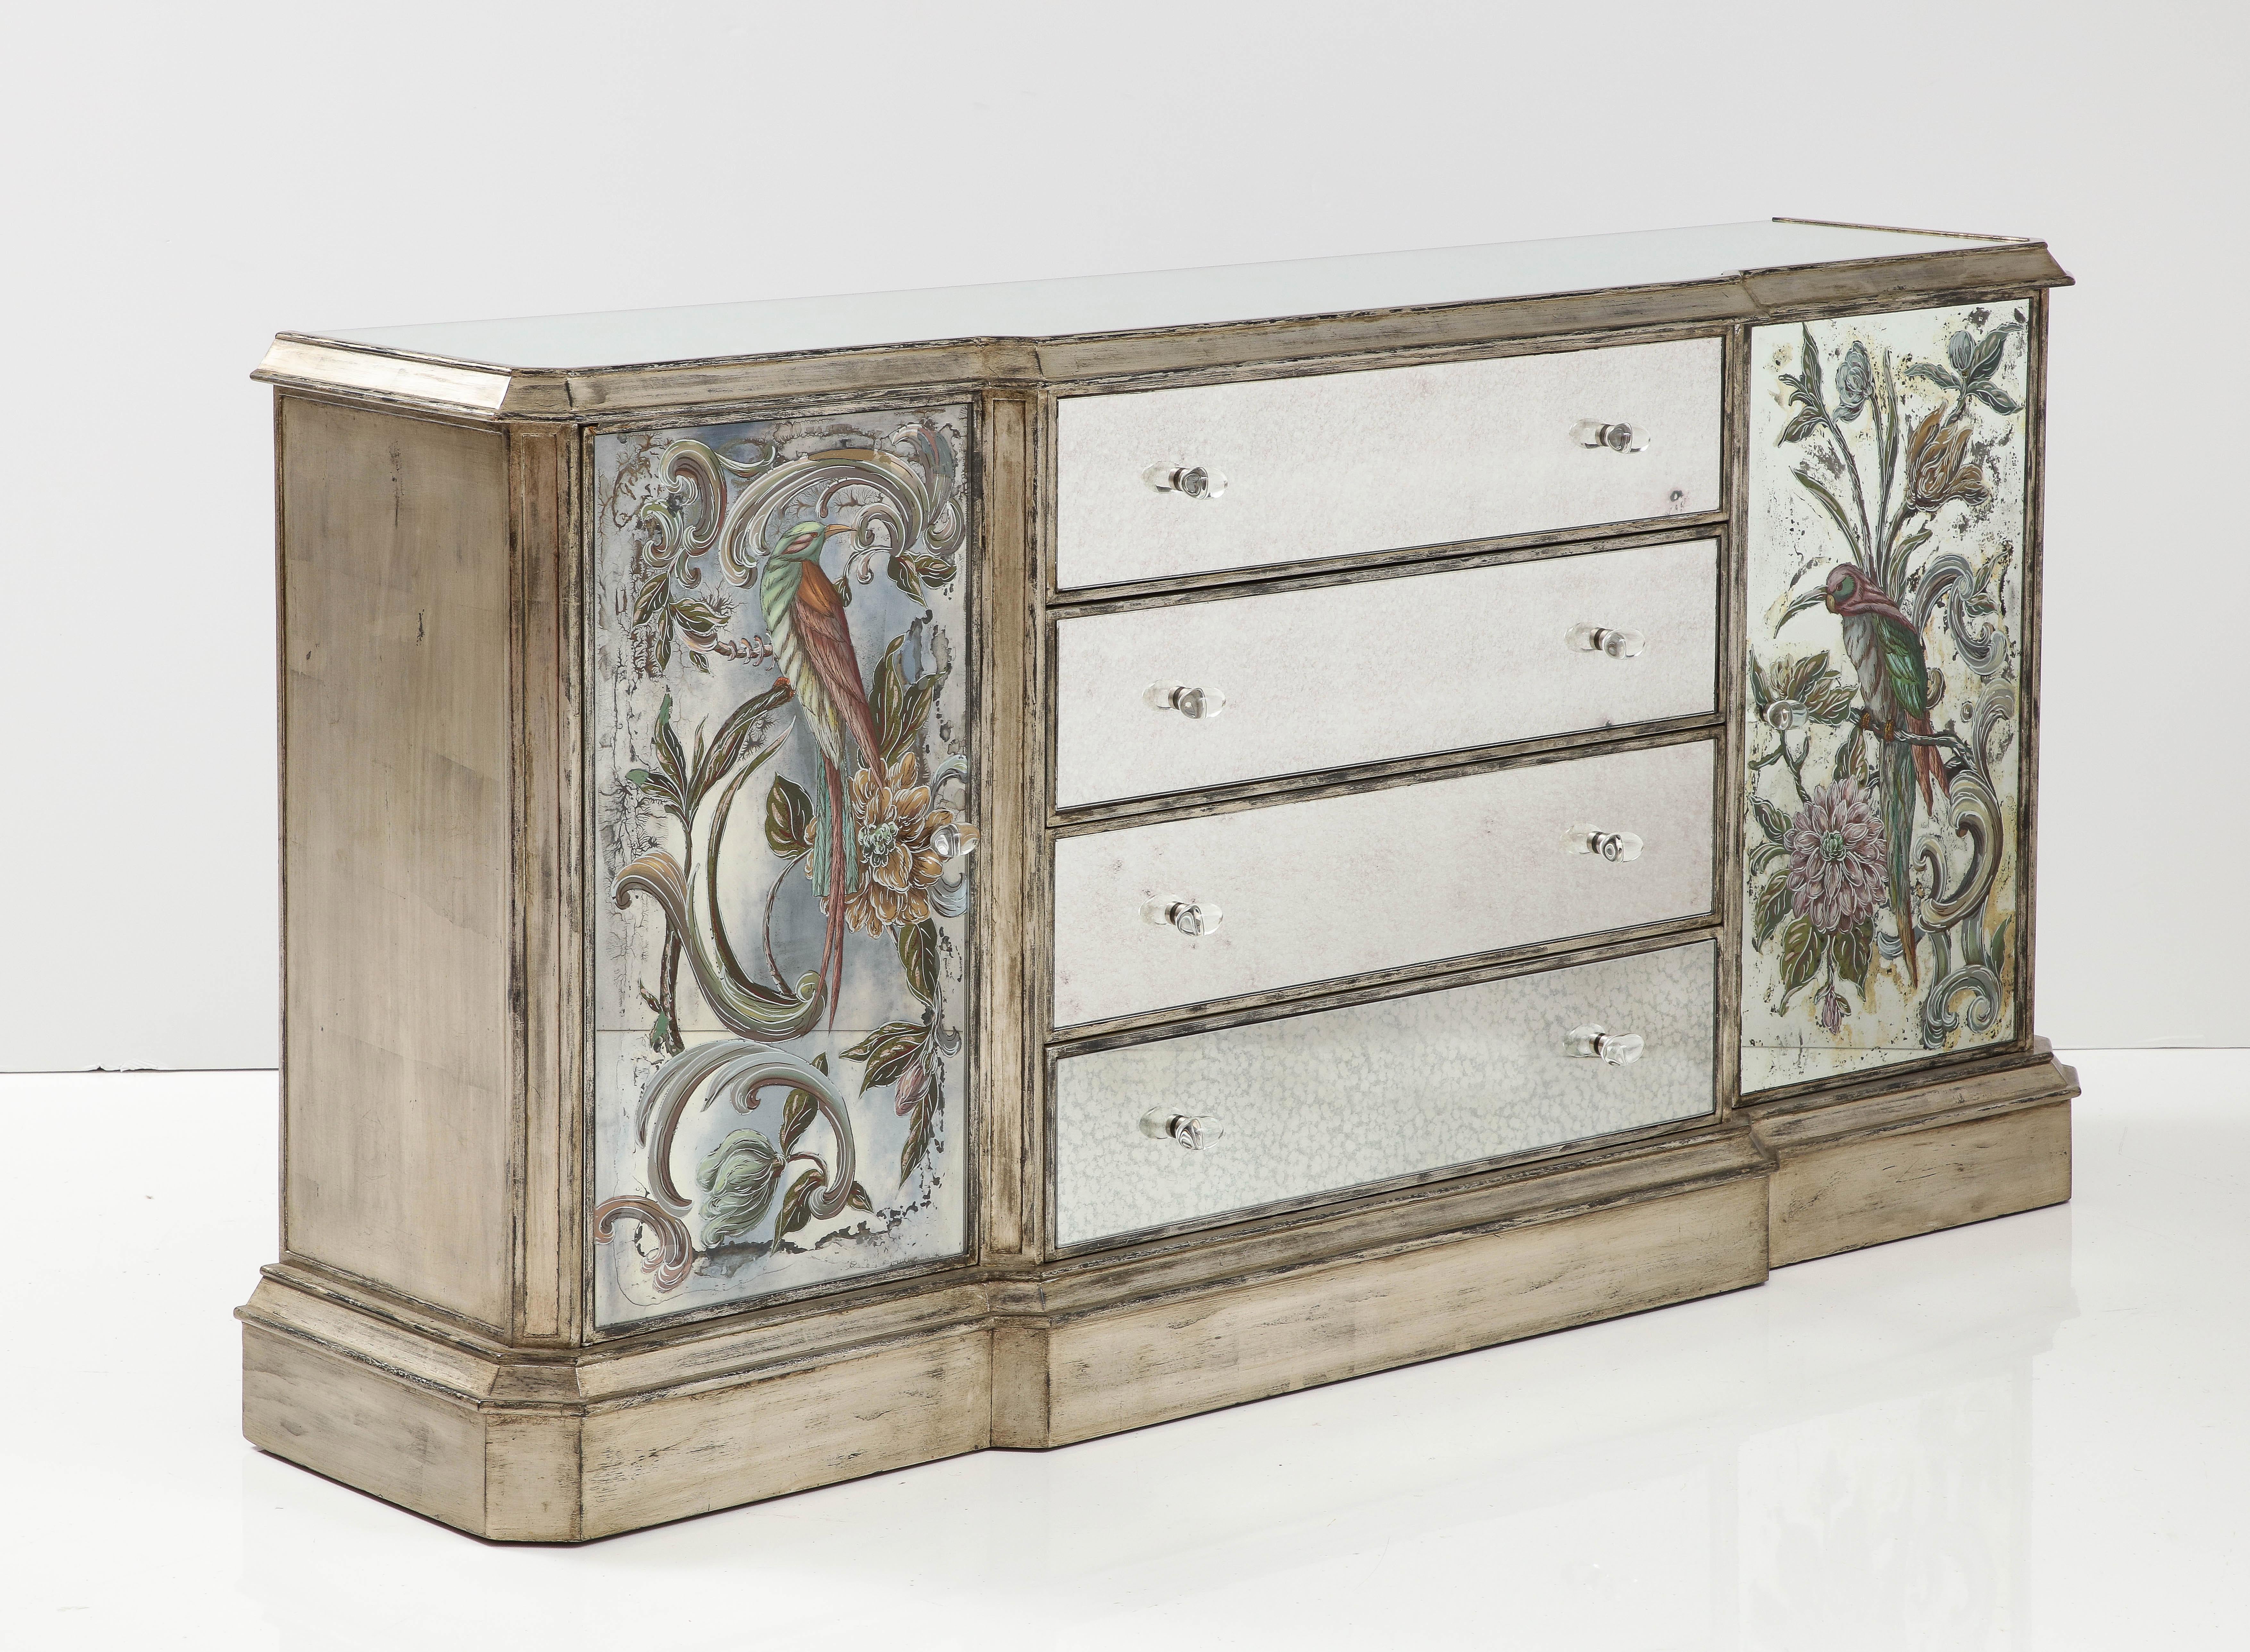 Chinoiserie inspired hand painted eglomise mirror paneled credenza featuring fanciful exotic birds. Credenza features 4 spacious mirrored front central drawers and 2 side compartments all with glass oval pulls. Case features an aged hand silver